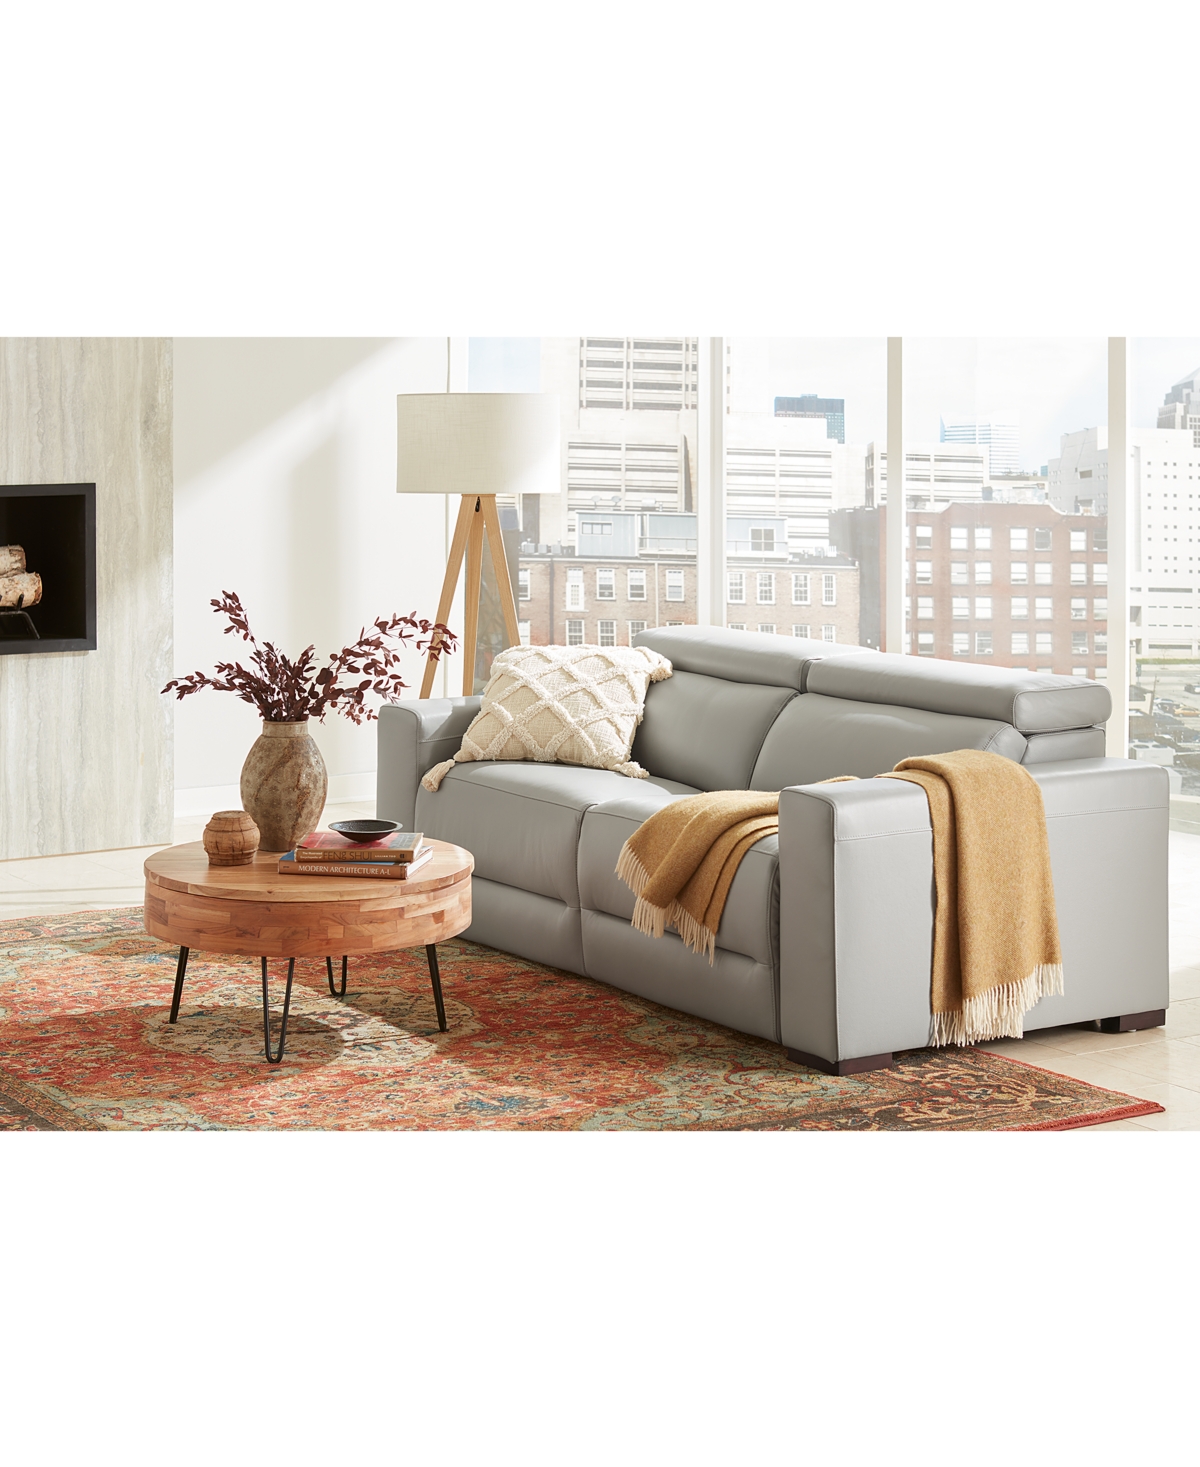 Shop Macy's Nevio 157" 6-pc. Leather Sectional With 3 Power Recliners, Headrests And Chaise, Created For  In Light Grey